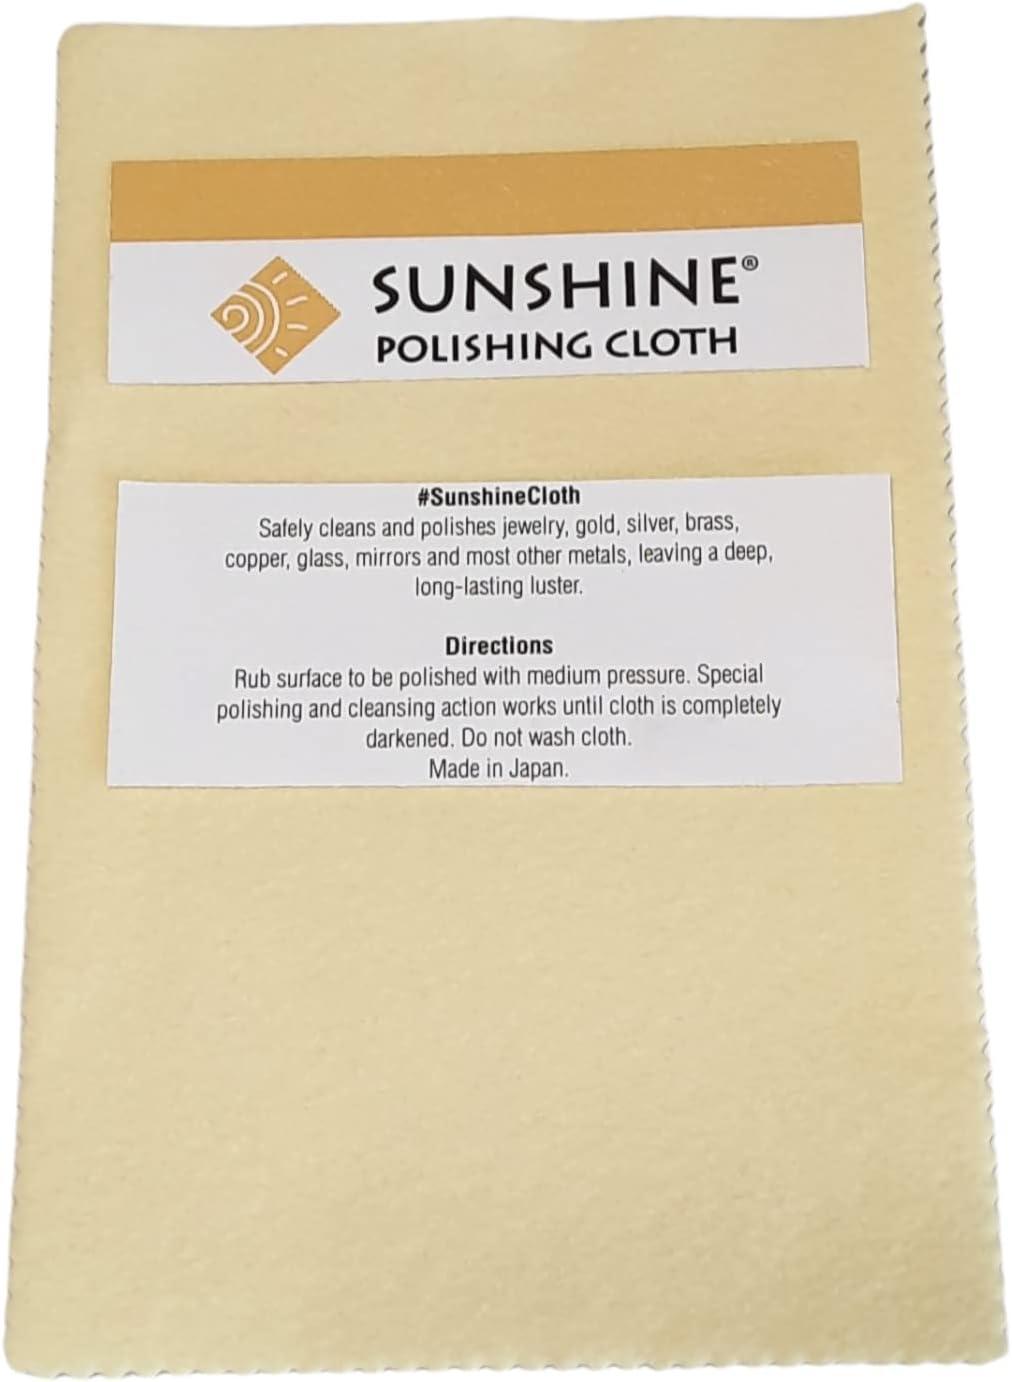 20 Sunshine Polishing Cloth for Sterling Silver, Gold, Brass and Copper Jewelry Polishing Cloth